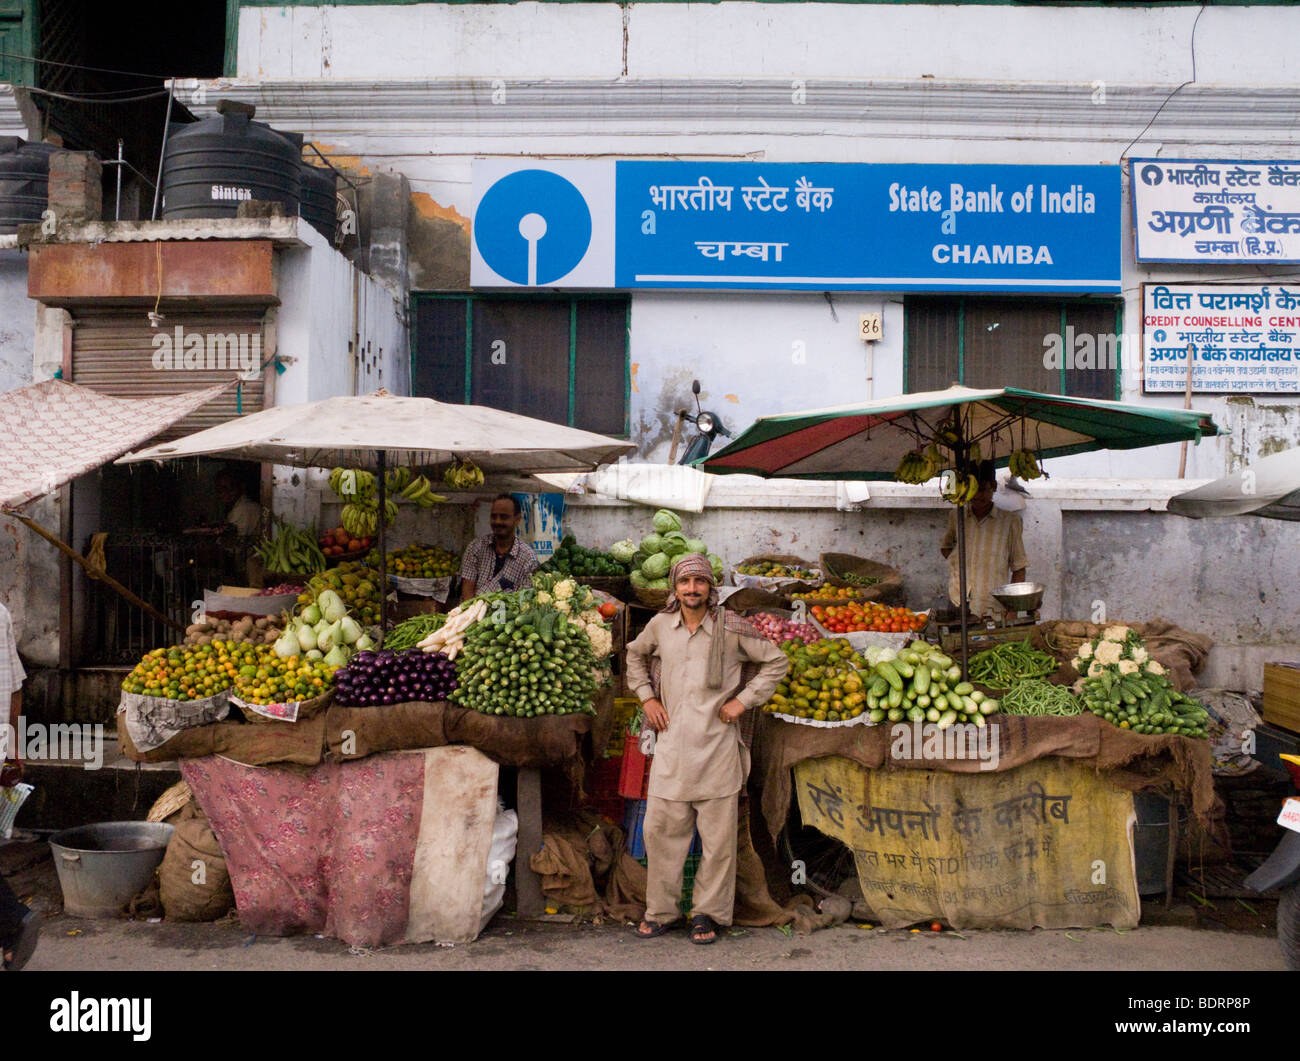 A fruit and vegetable stall in front of the State Bank of India branch in Chamba. Chamba, Himachal Pradesh. India. Stock Photo